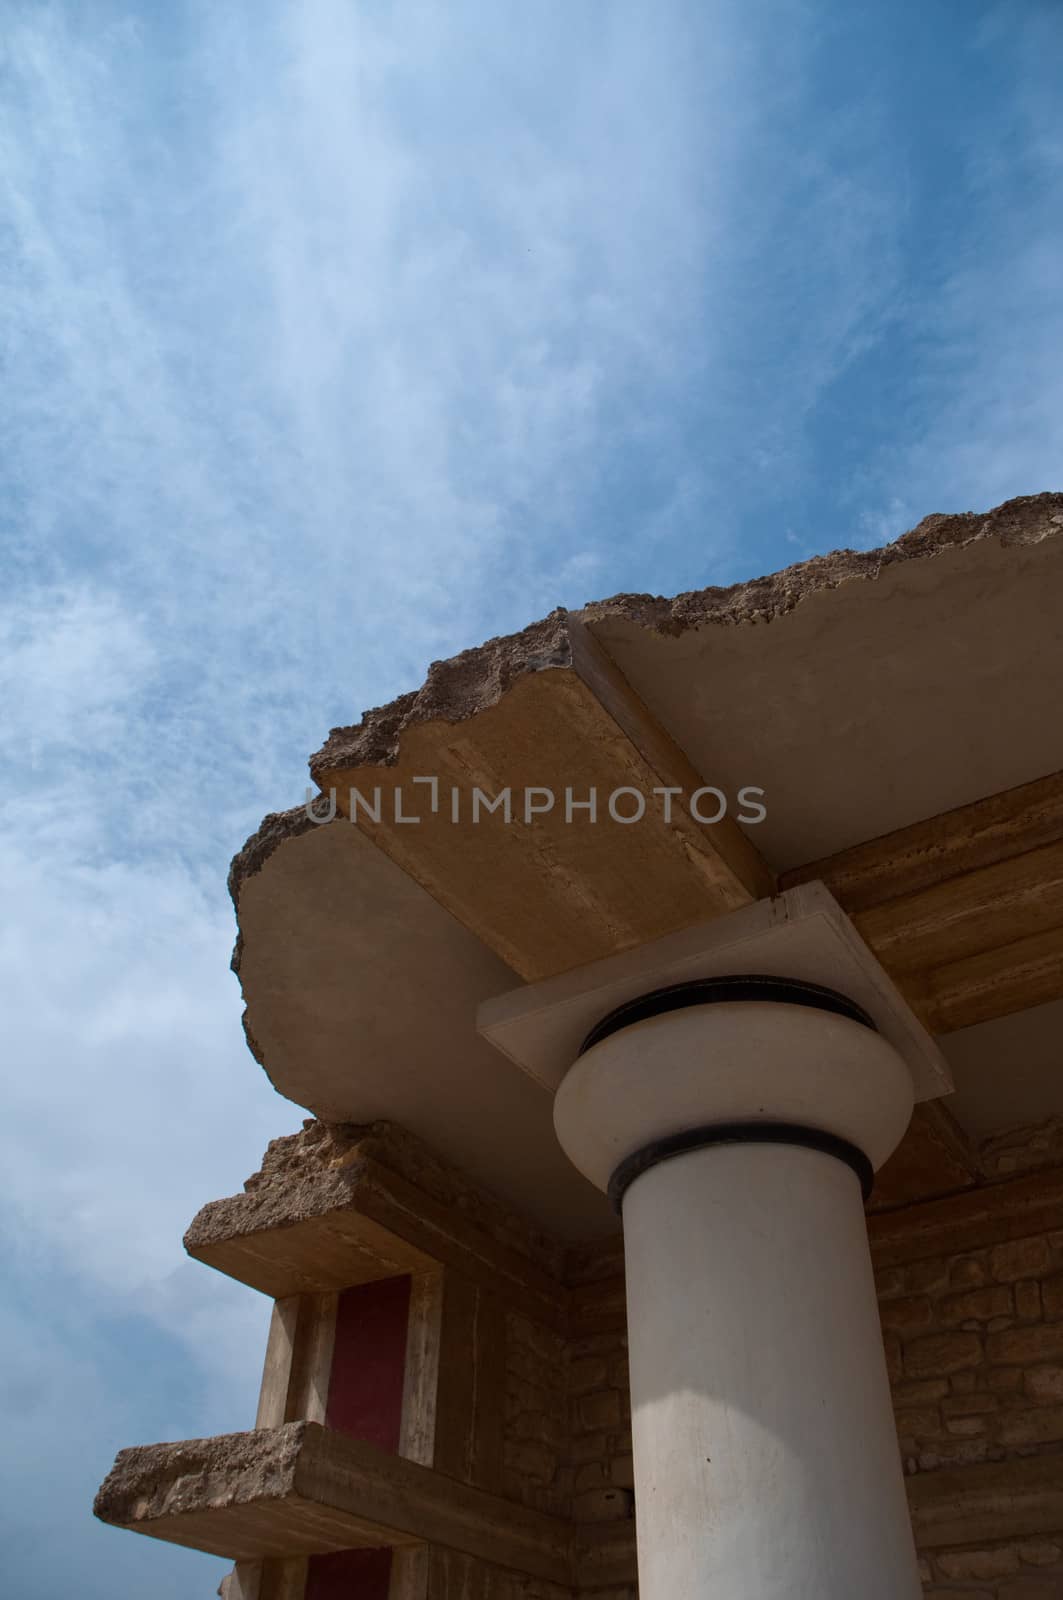 Knossos, also known as Labyrinth, or Knossos Palace, is the largest Bronze Age archaeological site on Crete.